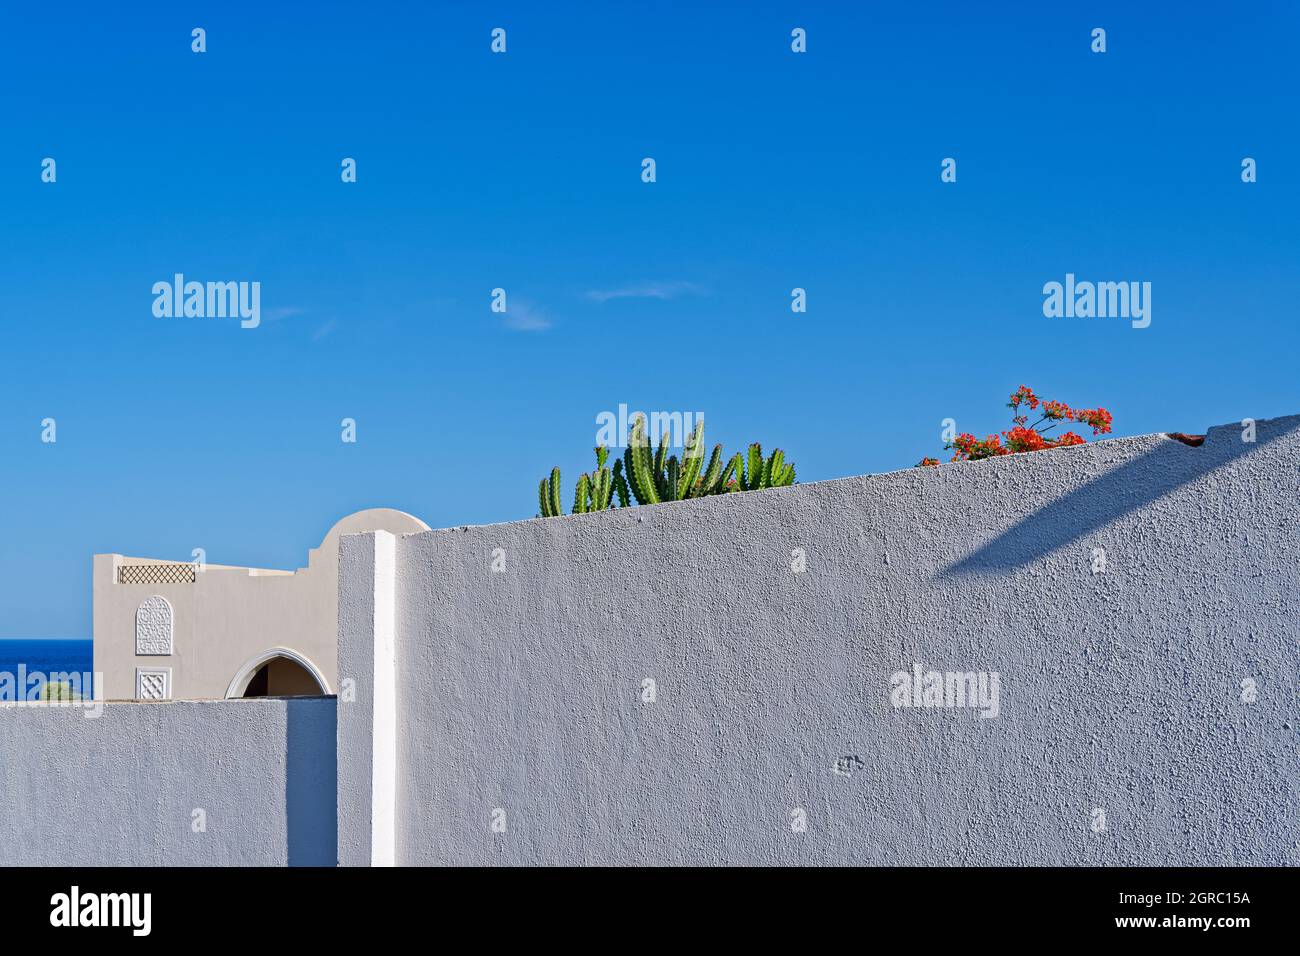 A Tall Cactus, A Flowering Tree, The Building Is Behind A White Textured Stone Wall Near The Sea. Stock Photo